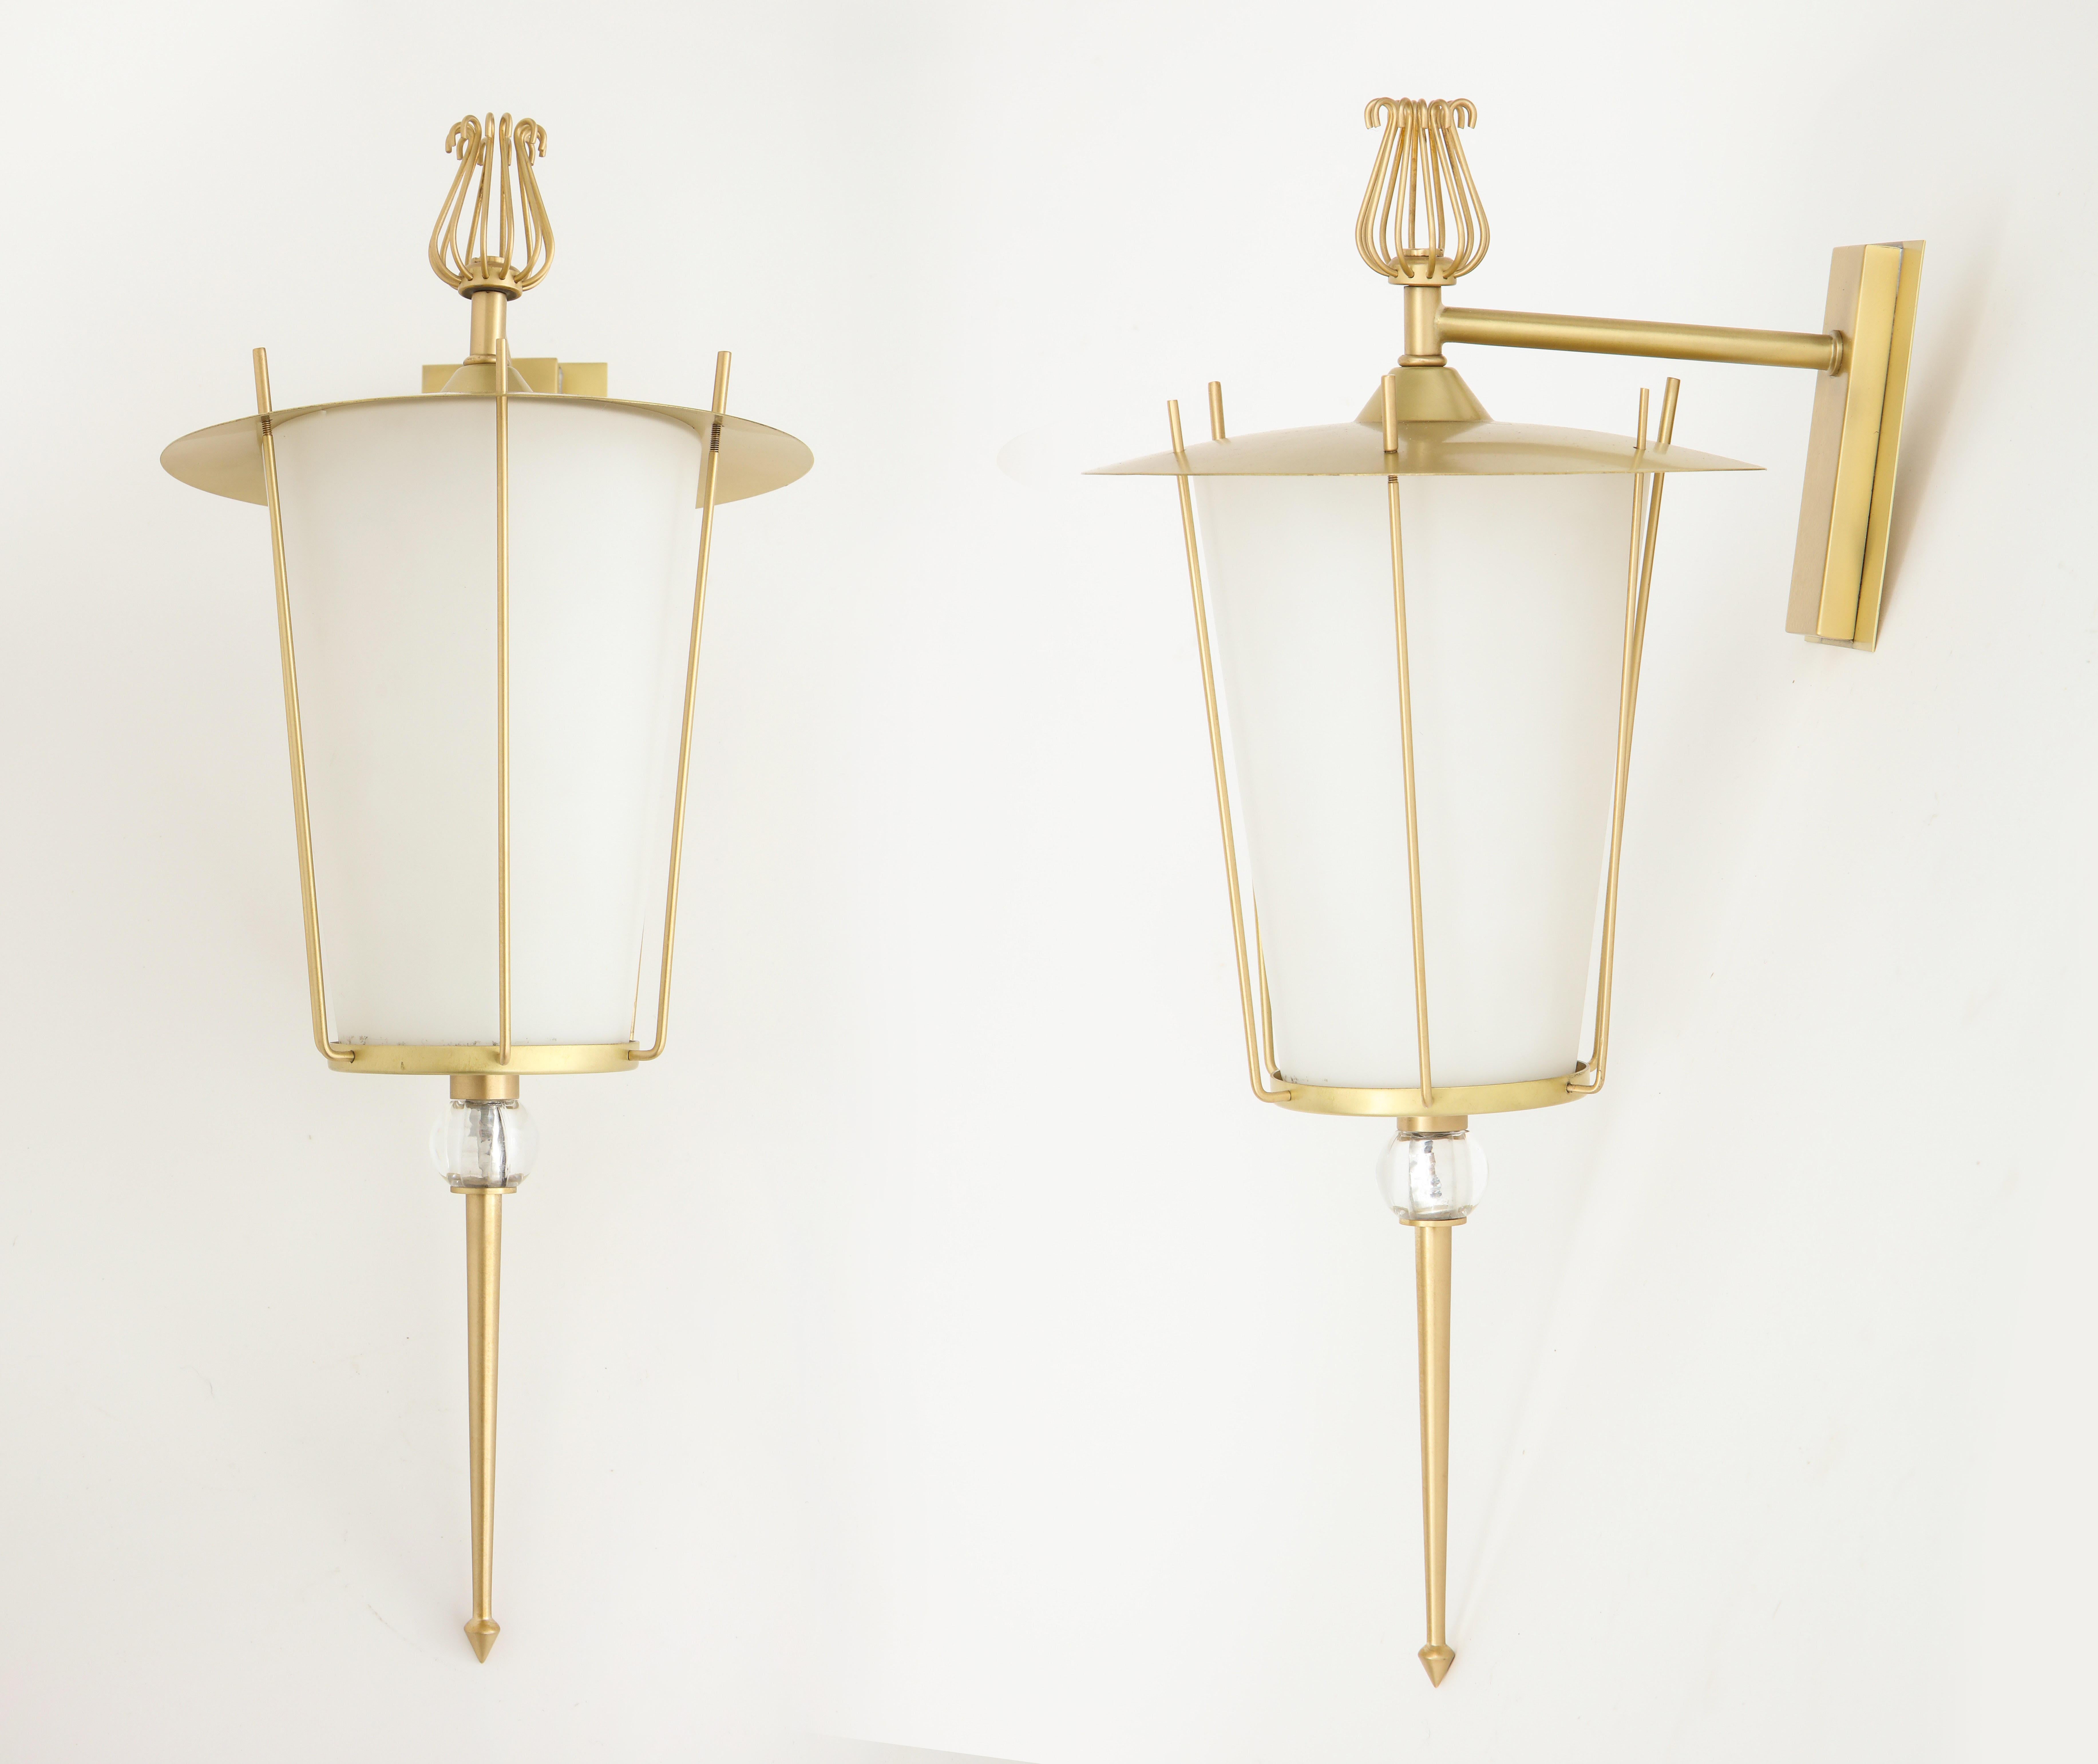 Pair of French midcentury lantern style brushed brass sconces with satin finished opaline white glass diffusers. Sconces have been rewired for use in the USA.